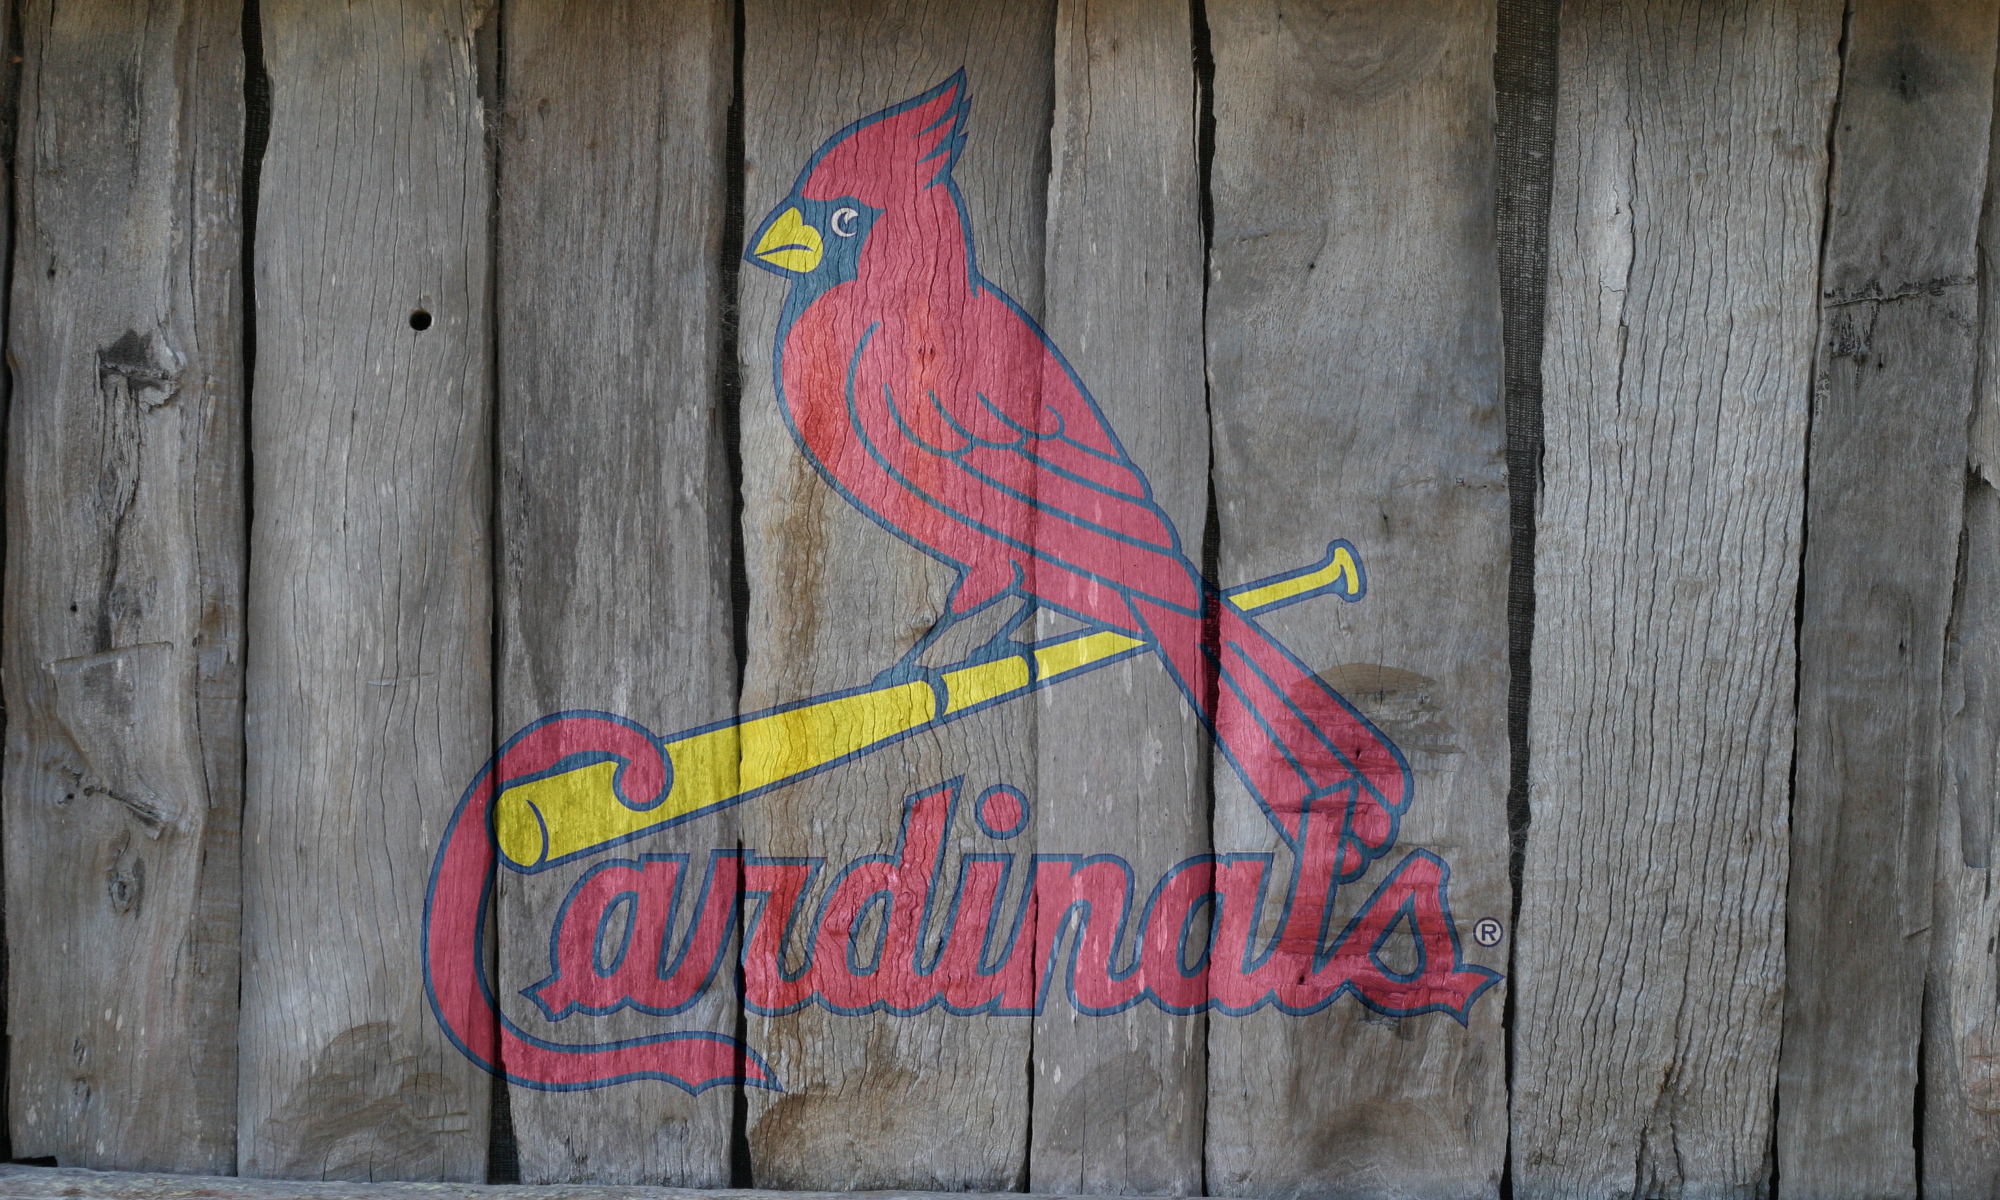 St Louis Cardinals Logo On Wood Fence Background By Oultre